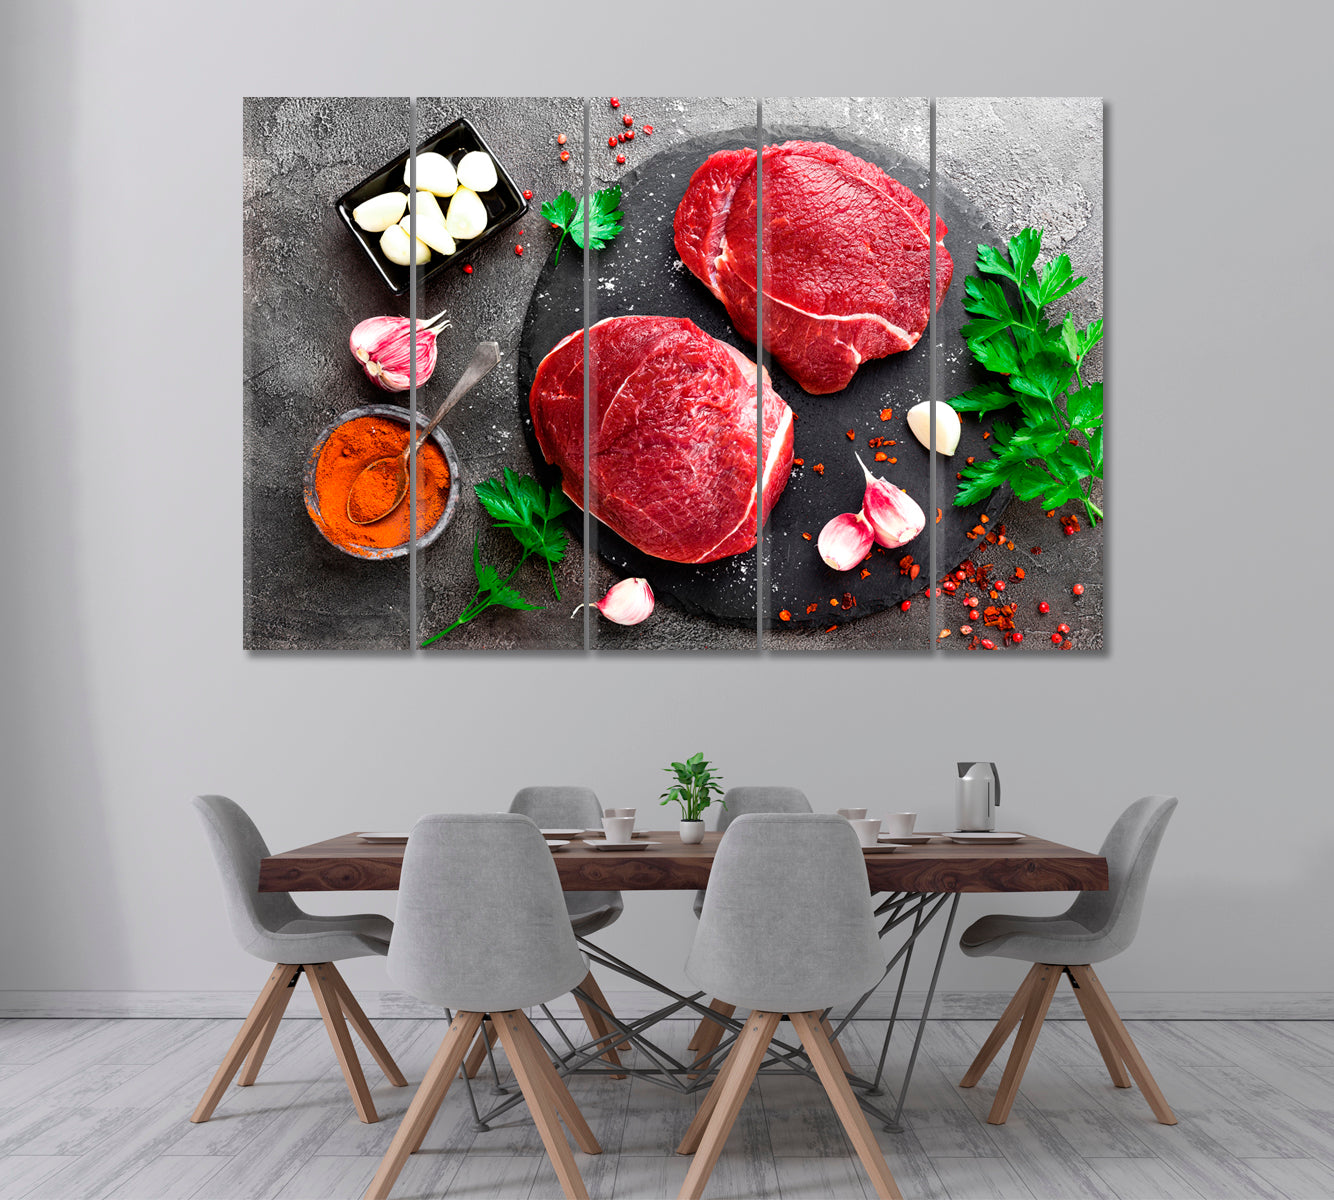 Raw Beef Steaks Canvas Print ArtLexy 5 Panels 36"x24" inches 